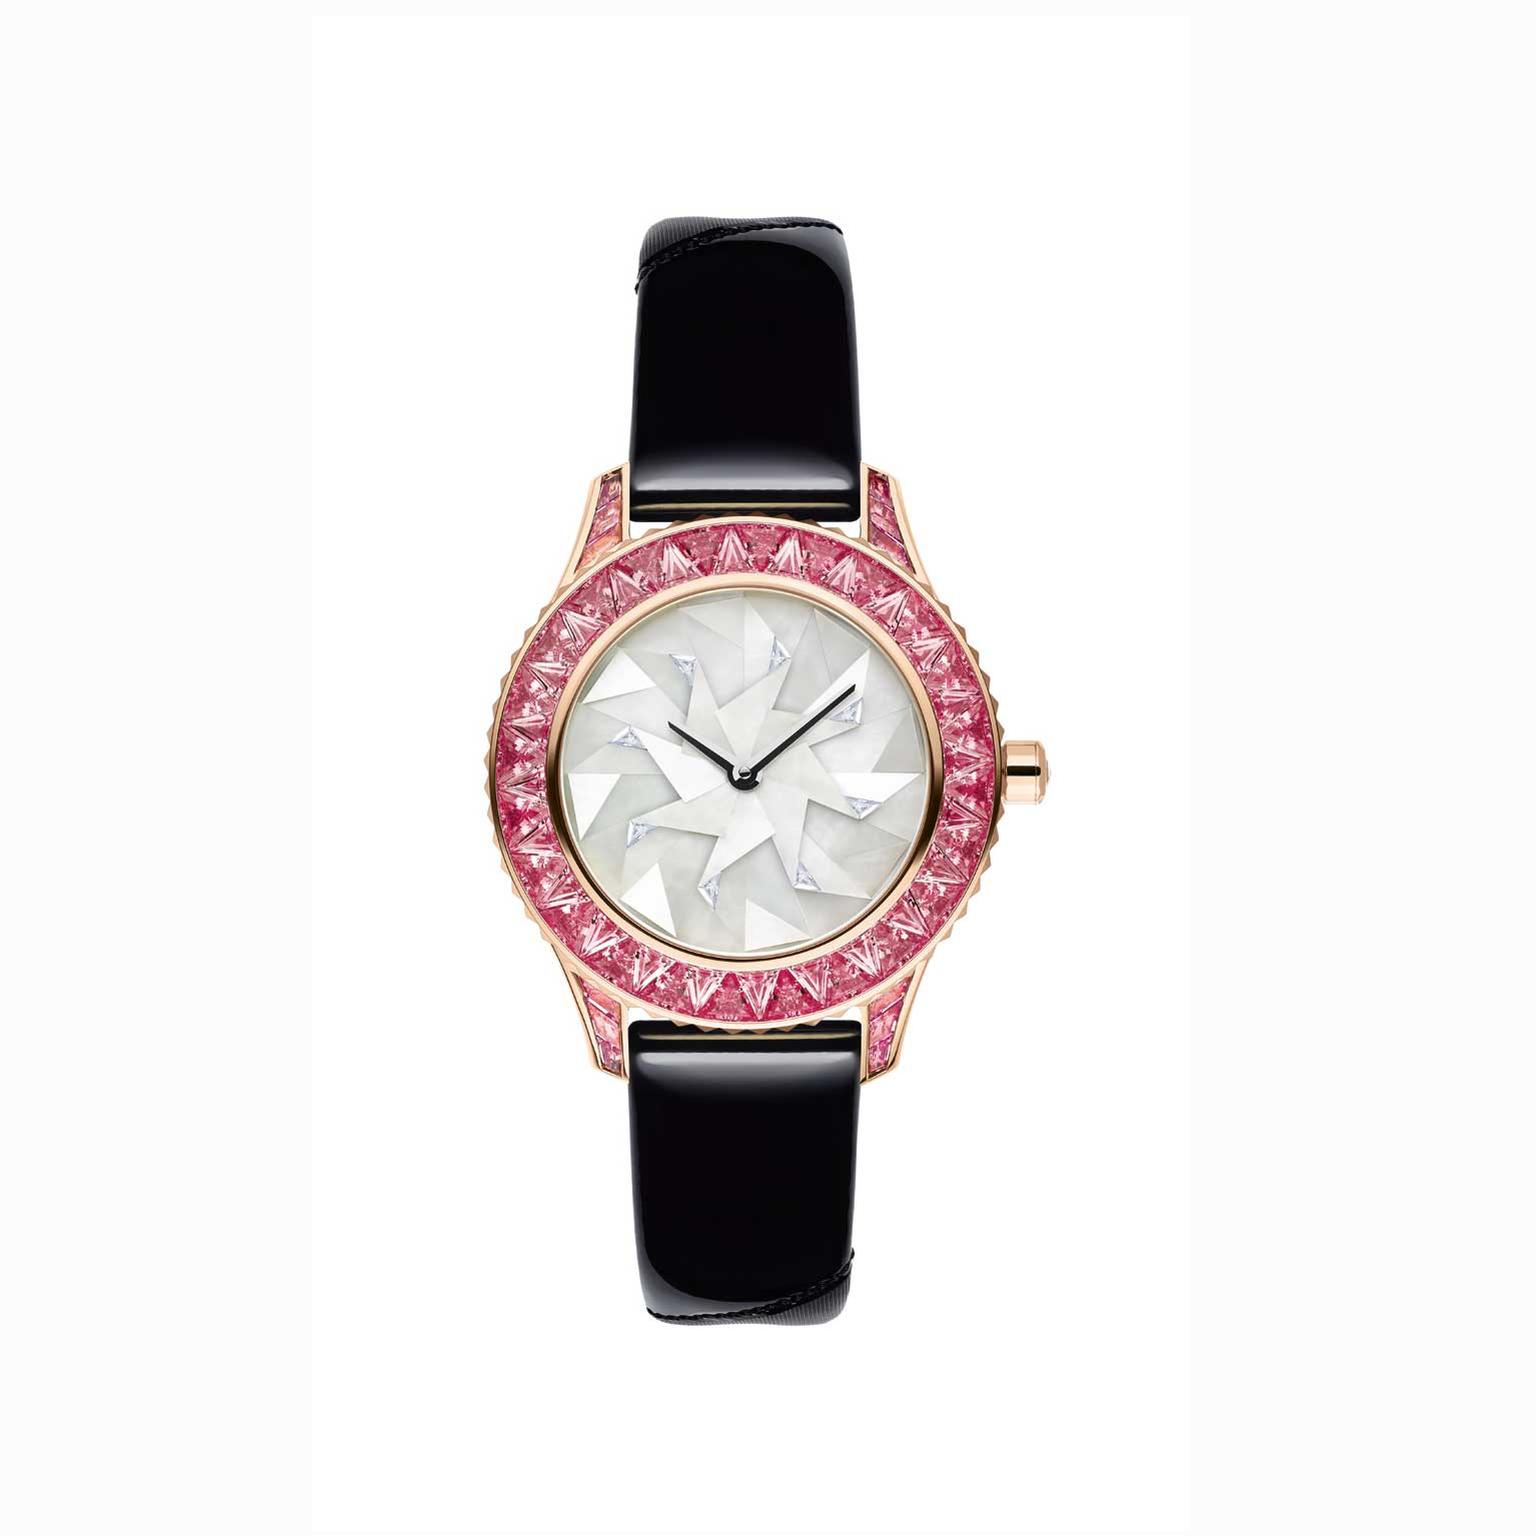 Dior Grand Soir Origami watch with pink sapphires